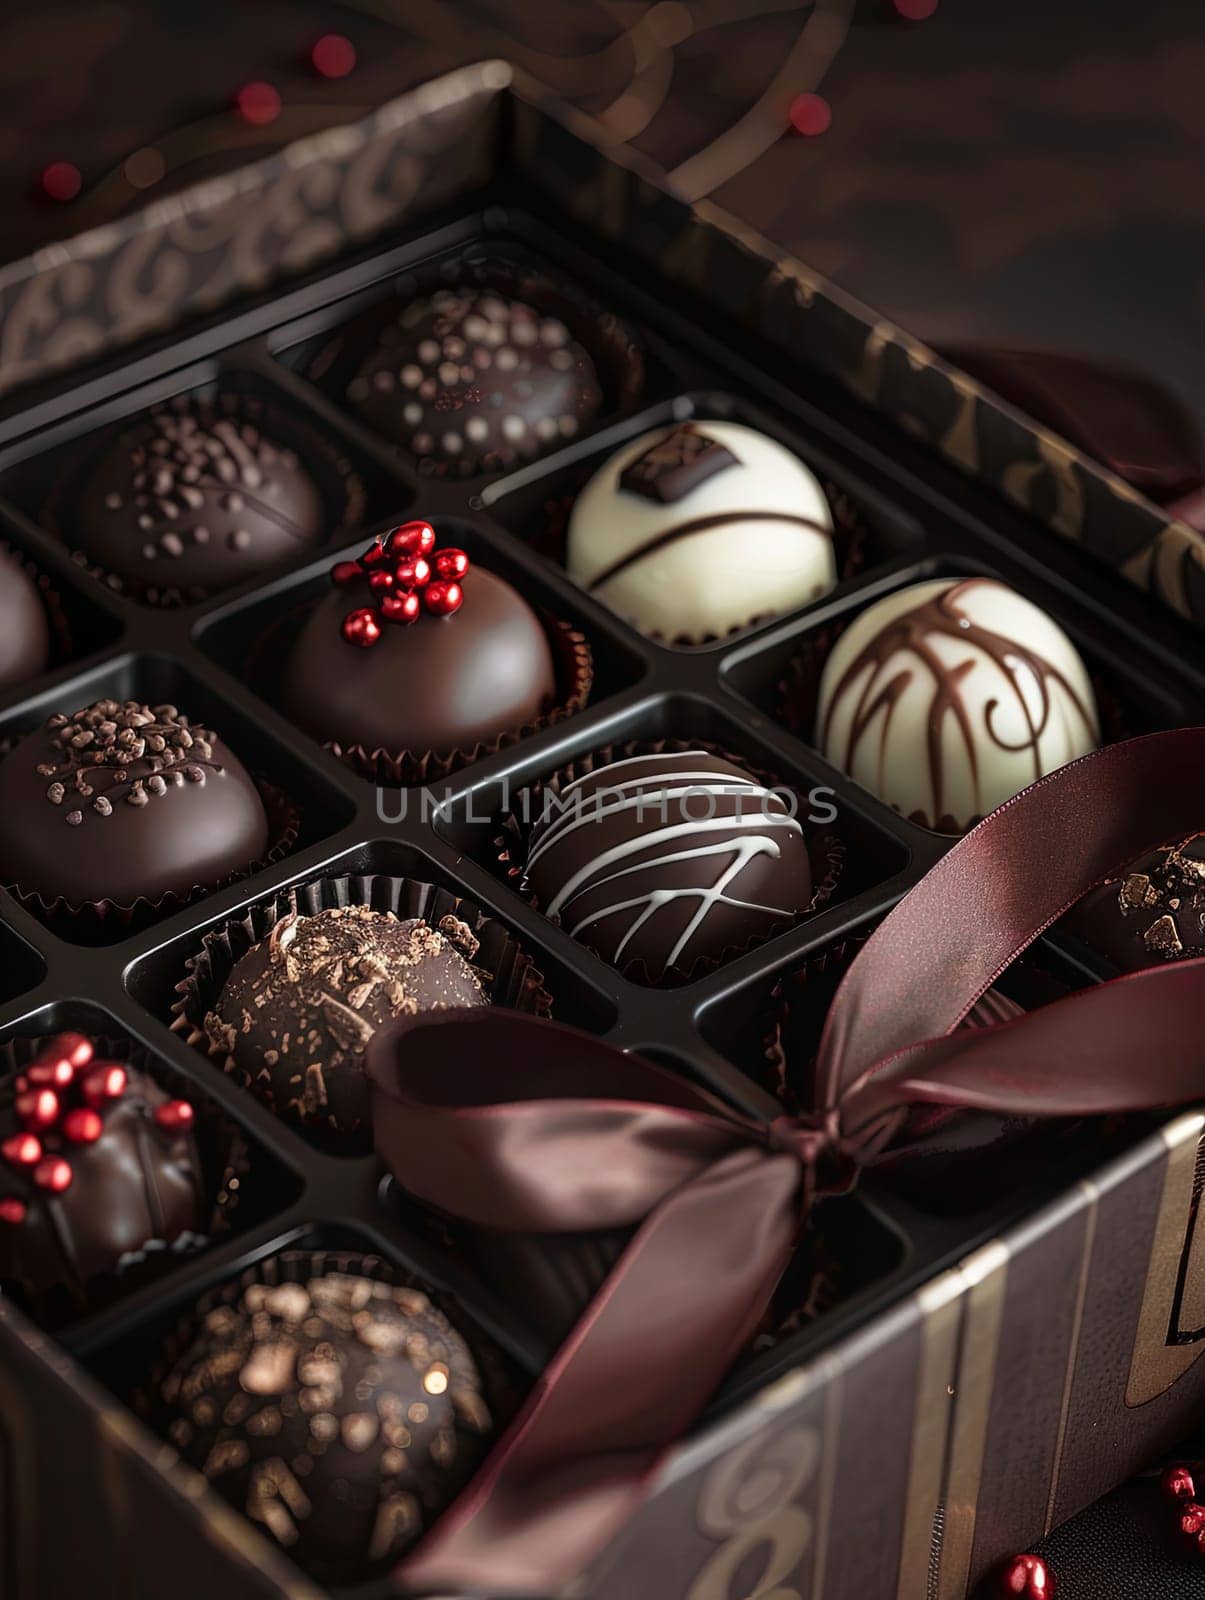 Elegant box of chocolate truffles with decorative ribbon in rich dark colors, high detail, luxurious presentation.